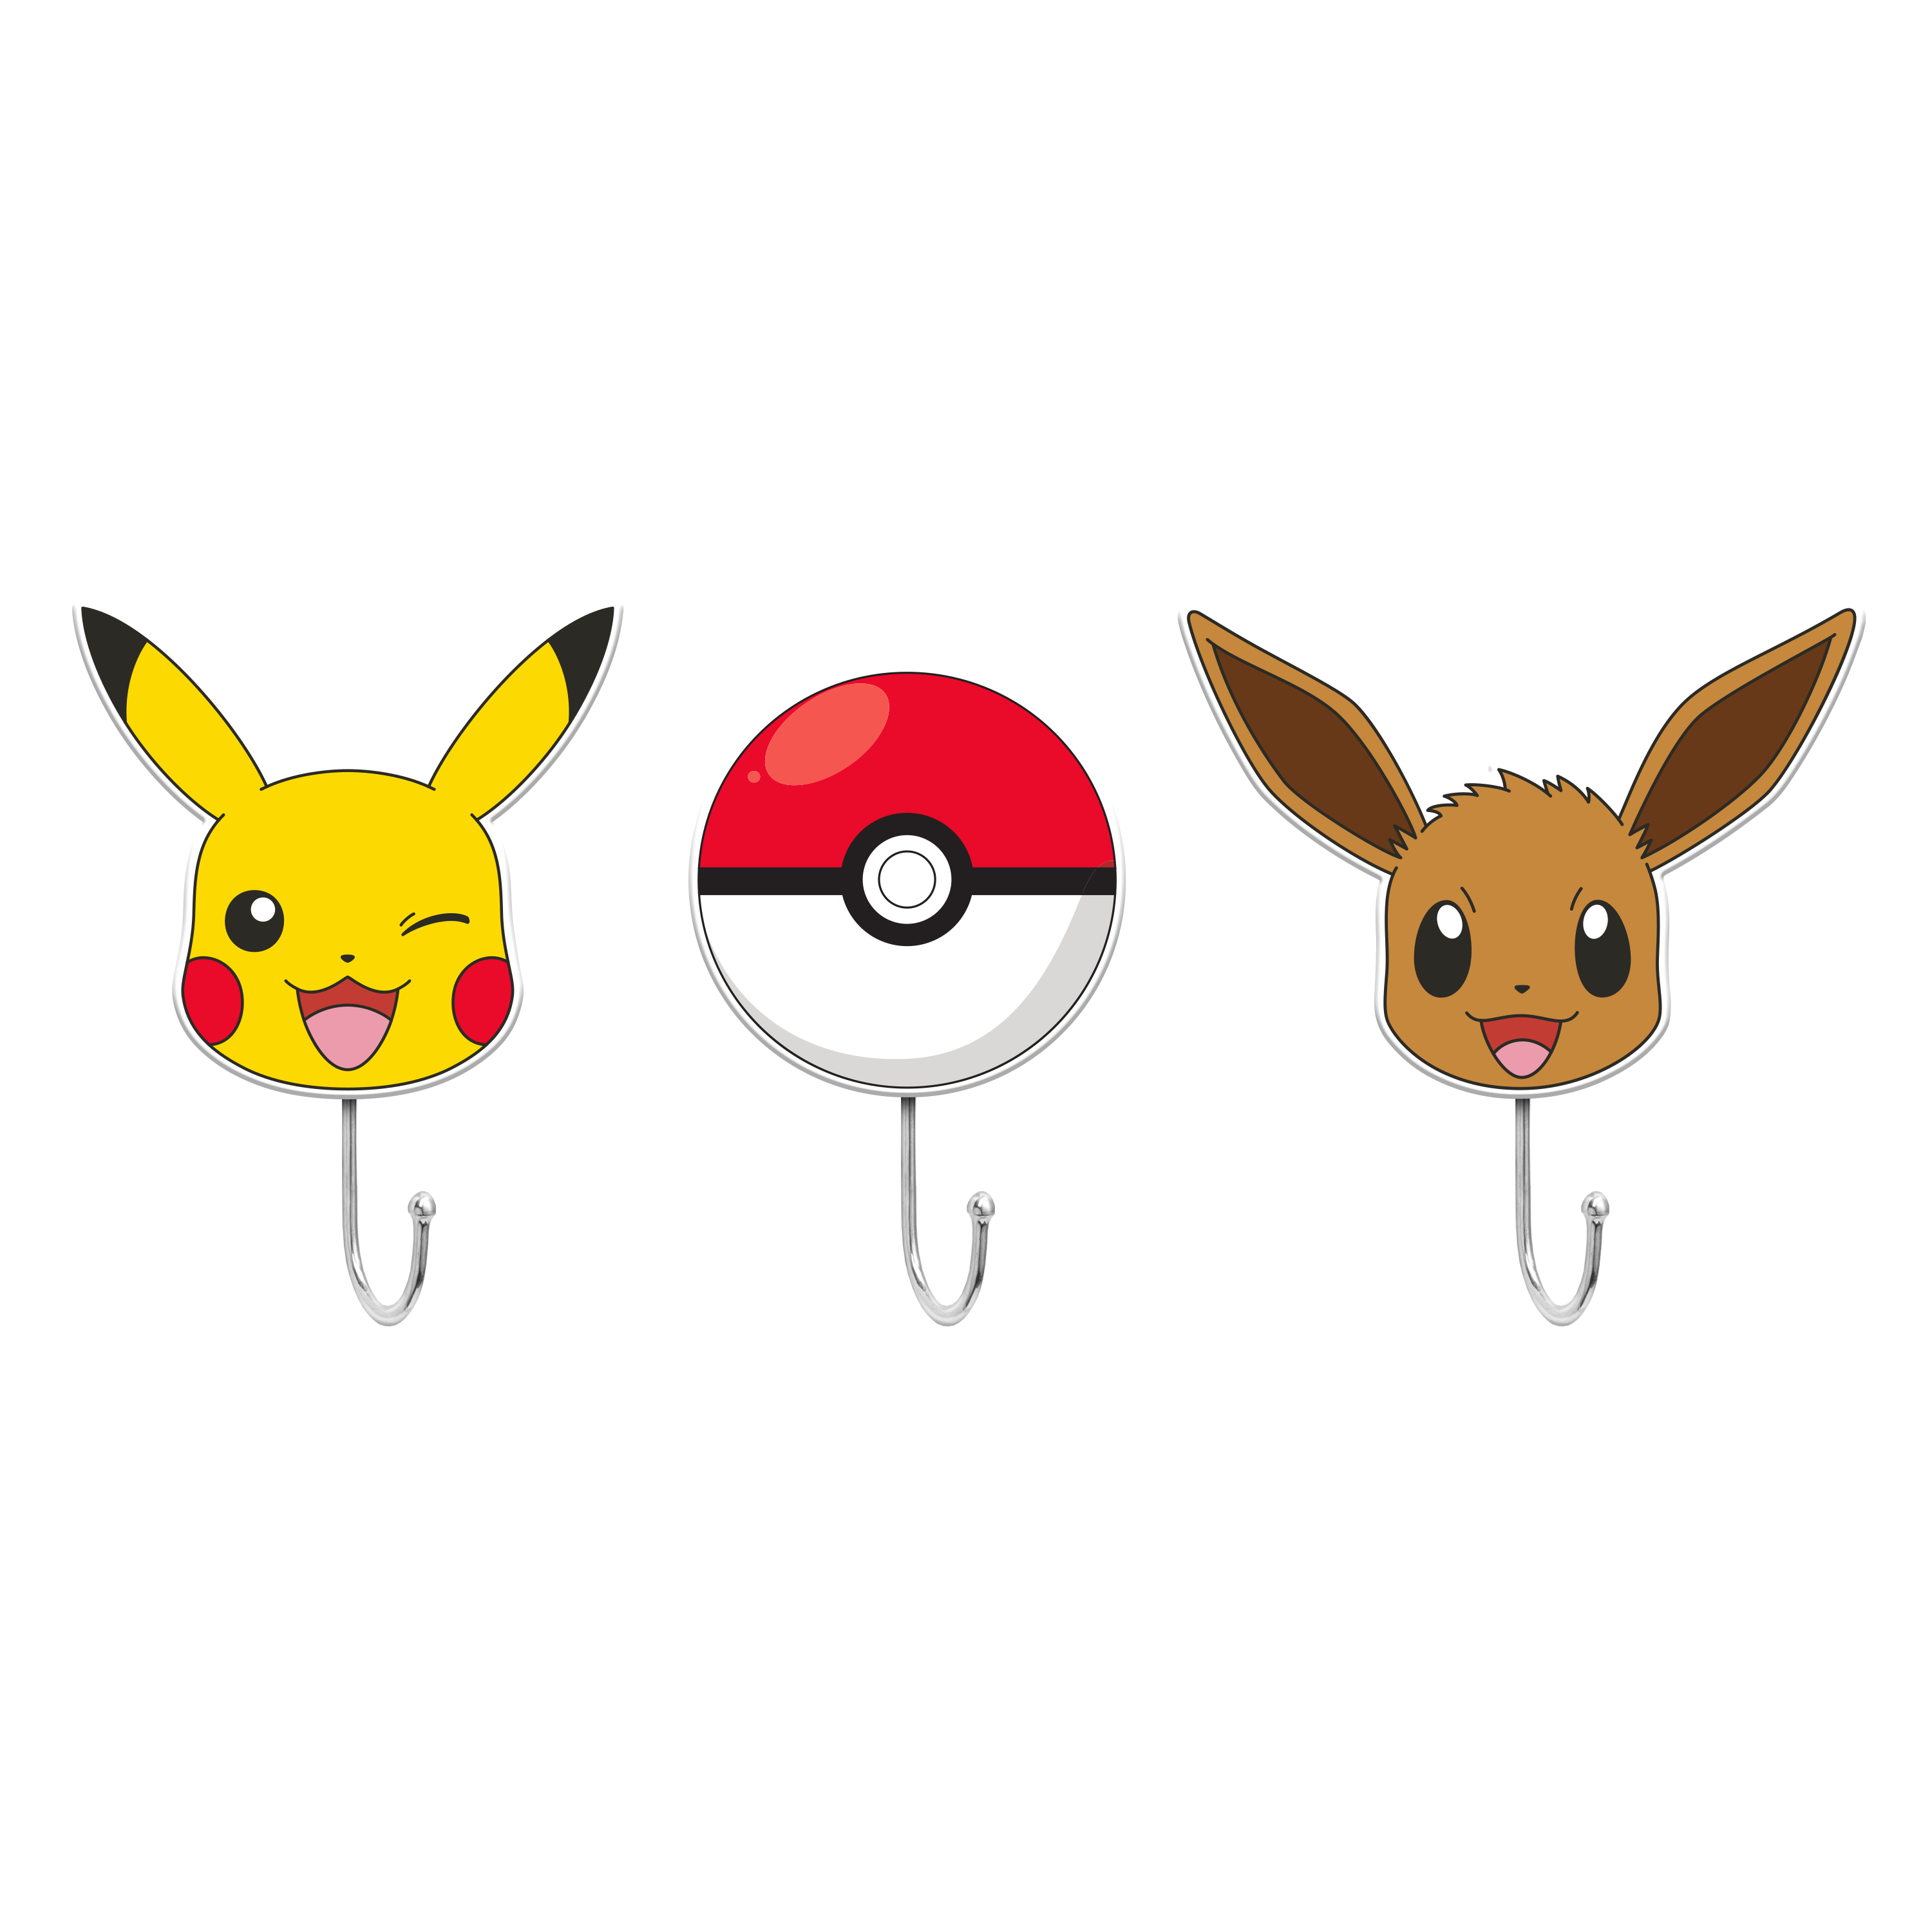 Pocket Monsters Logo, Pokeball & Pikachu Embroidered Set of 3 Patches